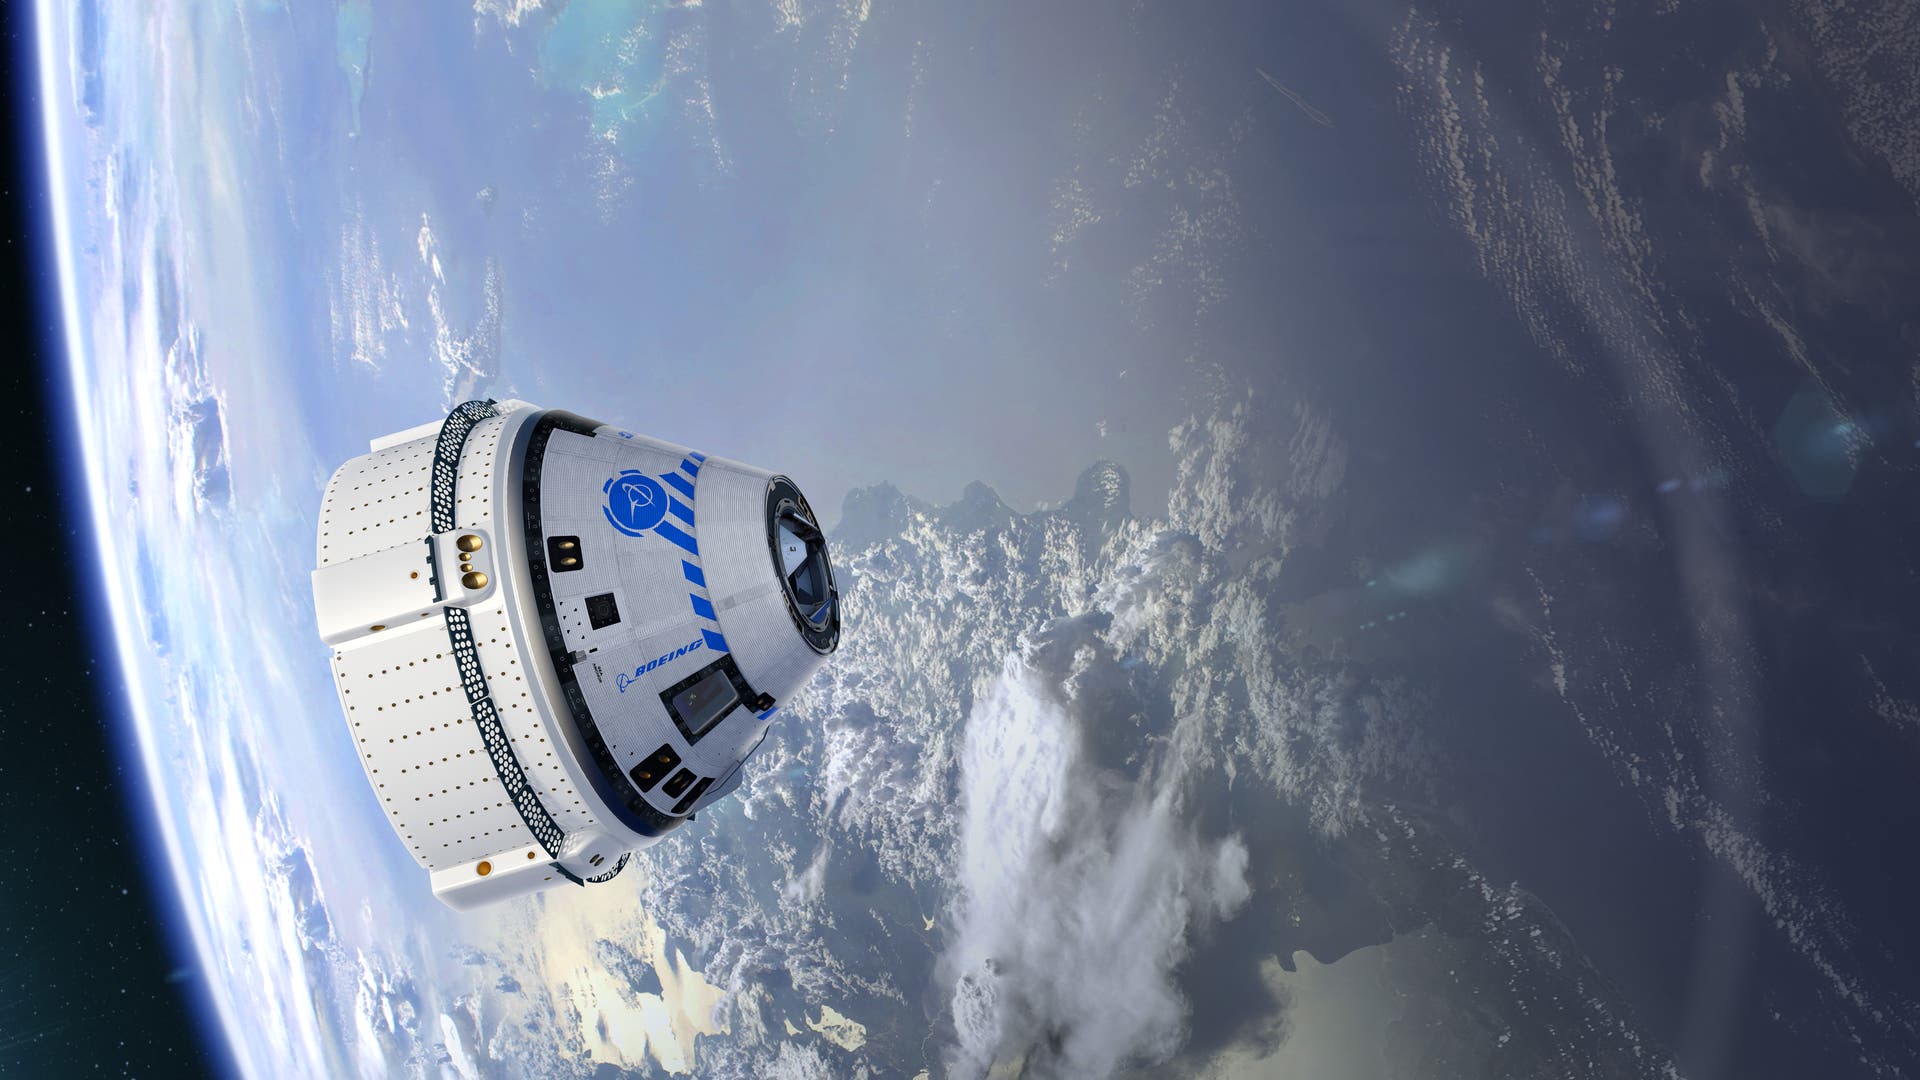 Missile problems prevent Starliner from taking off